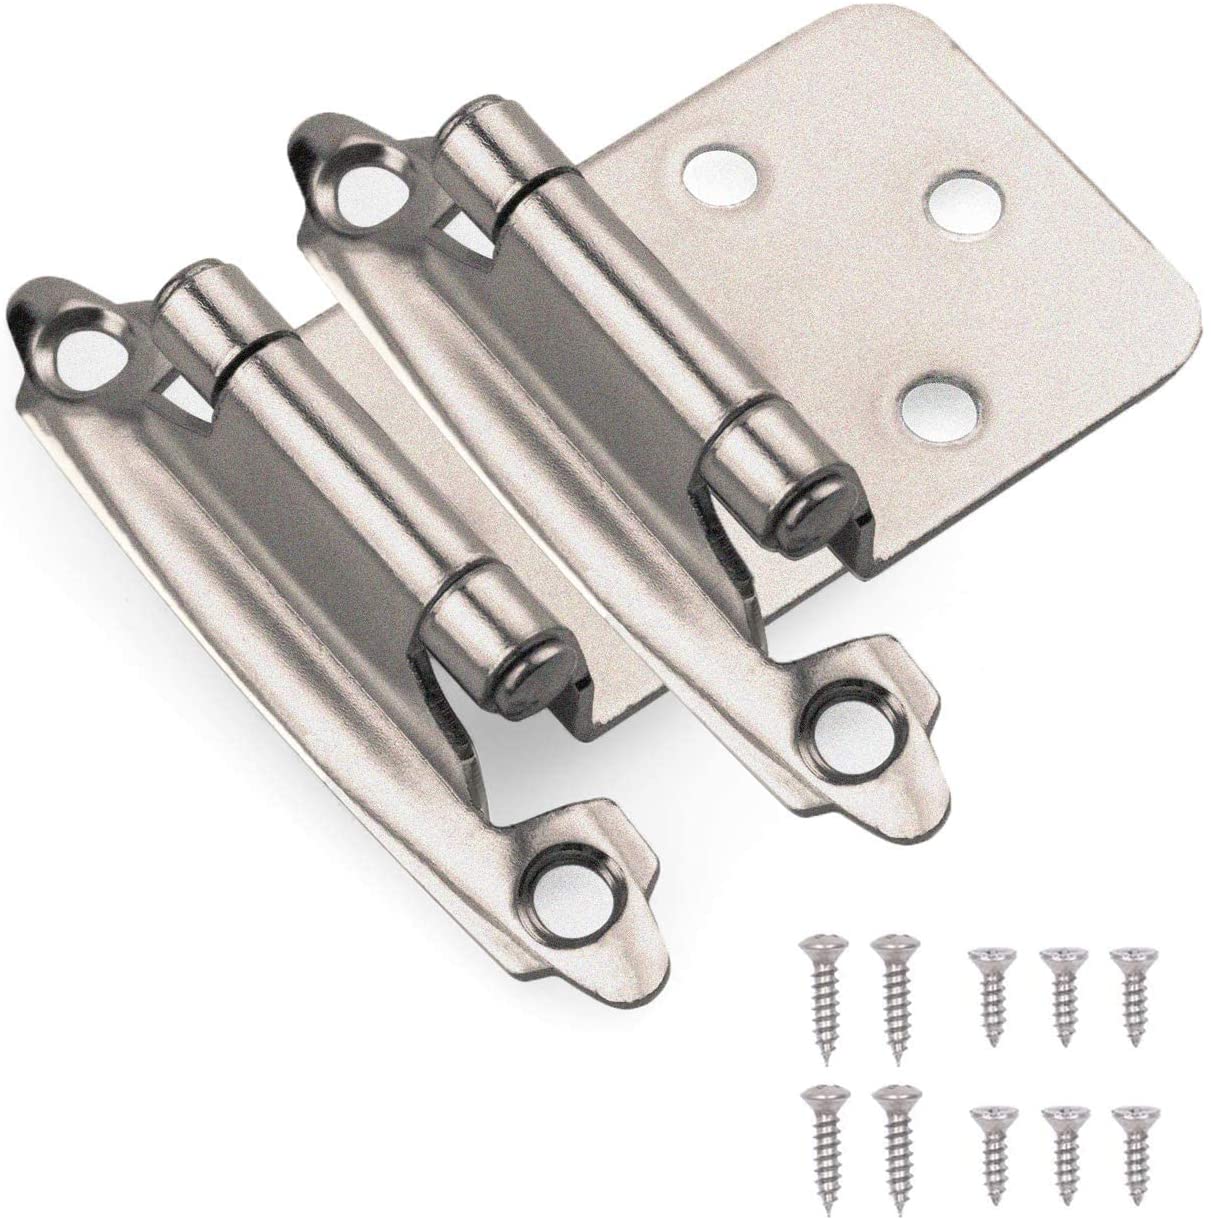 Double Elite Rust-Proof Nickel Plated Cabinet Hinges, 50-Count